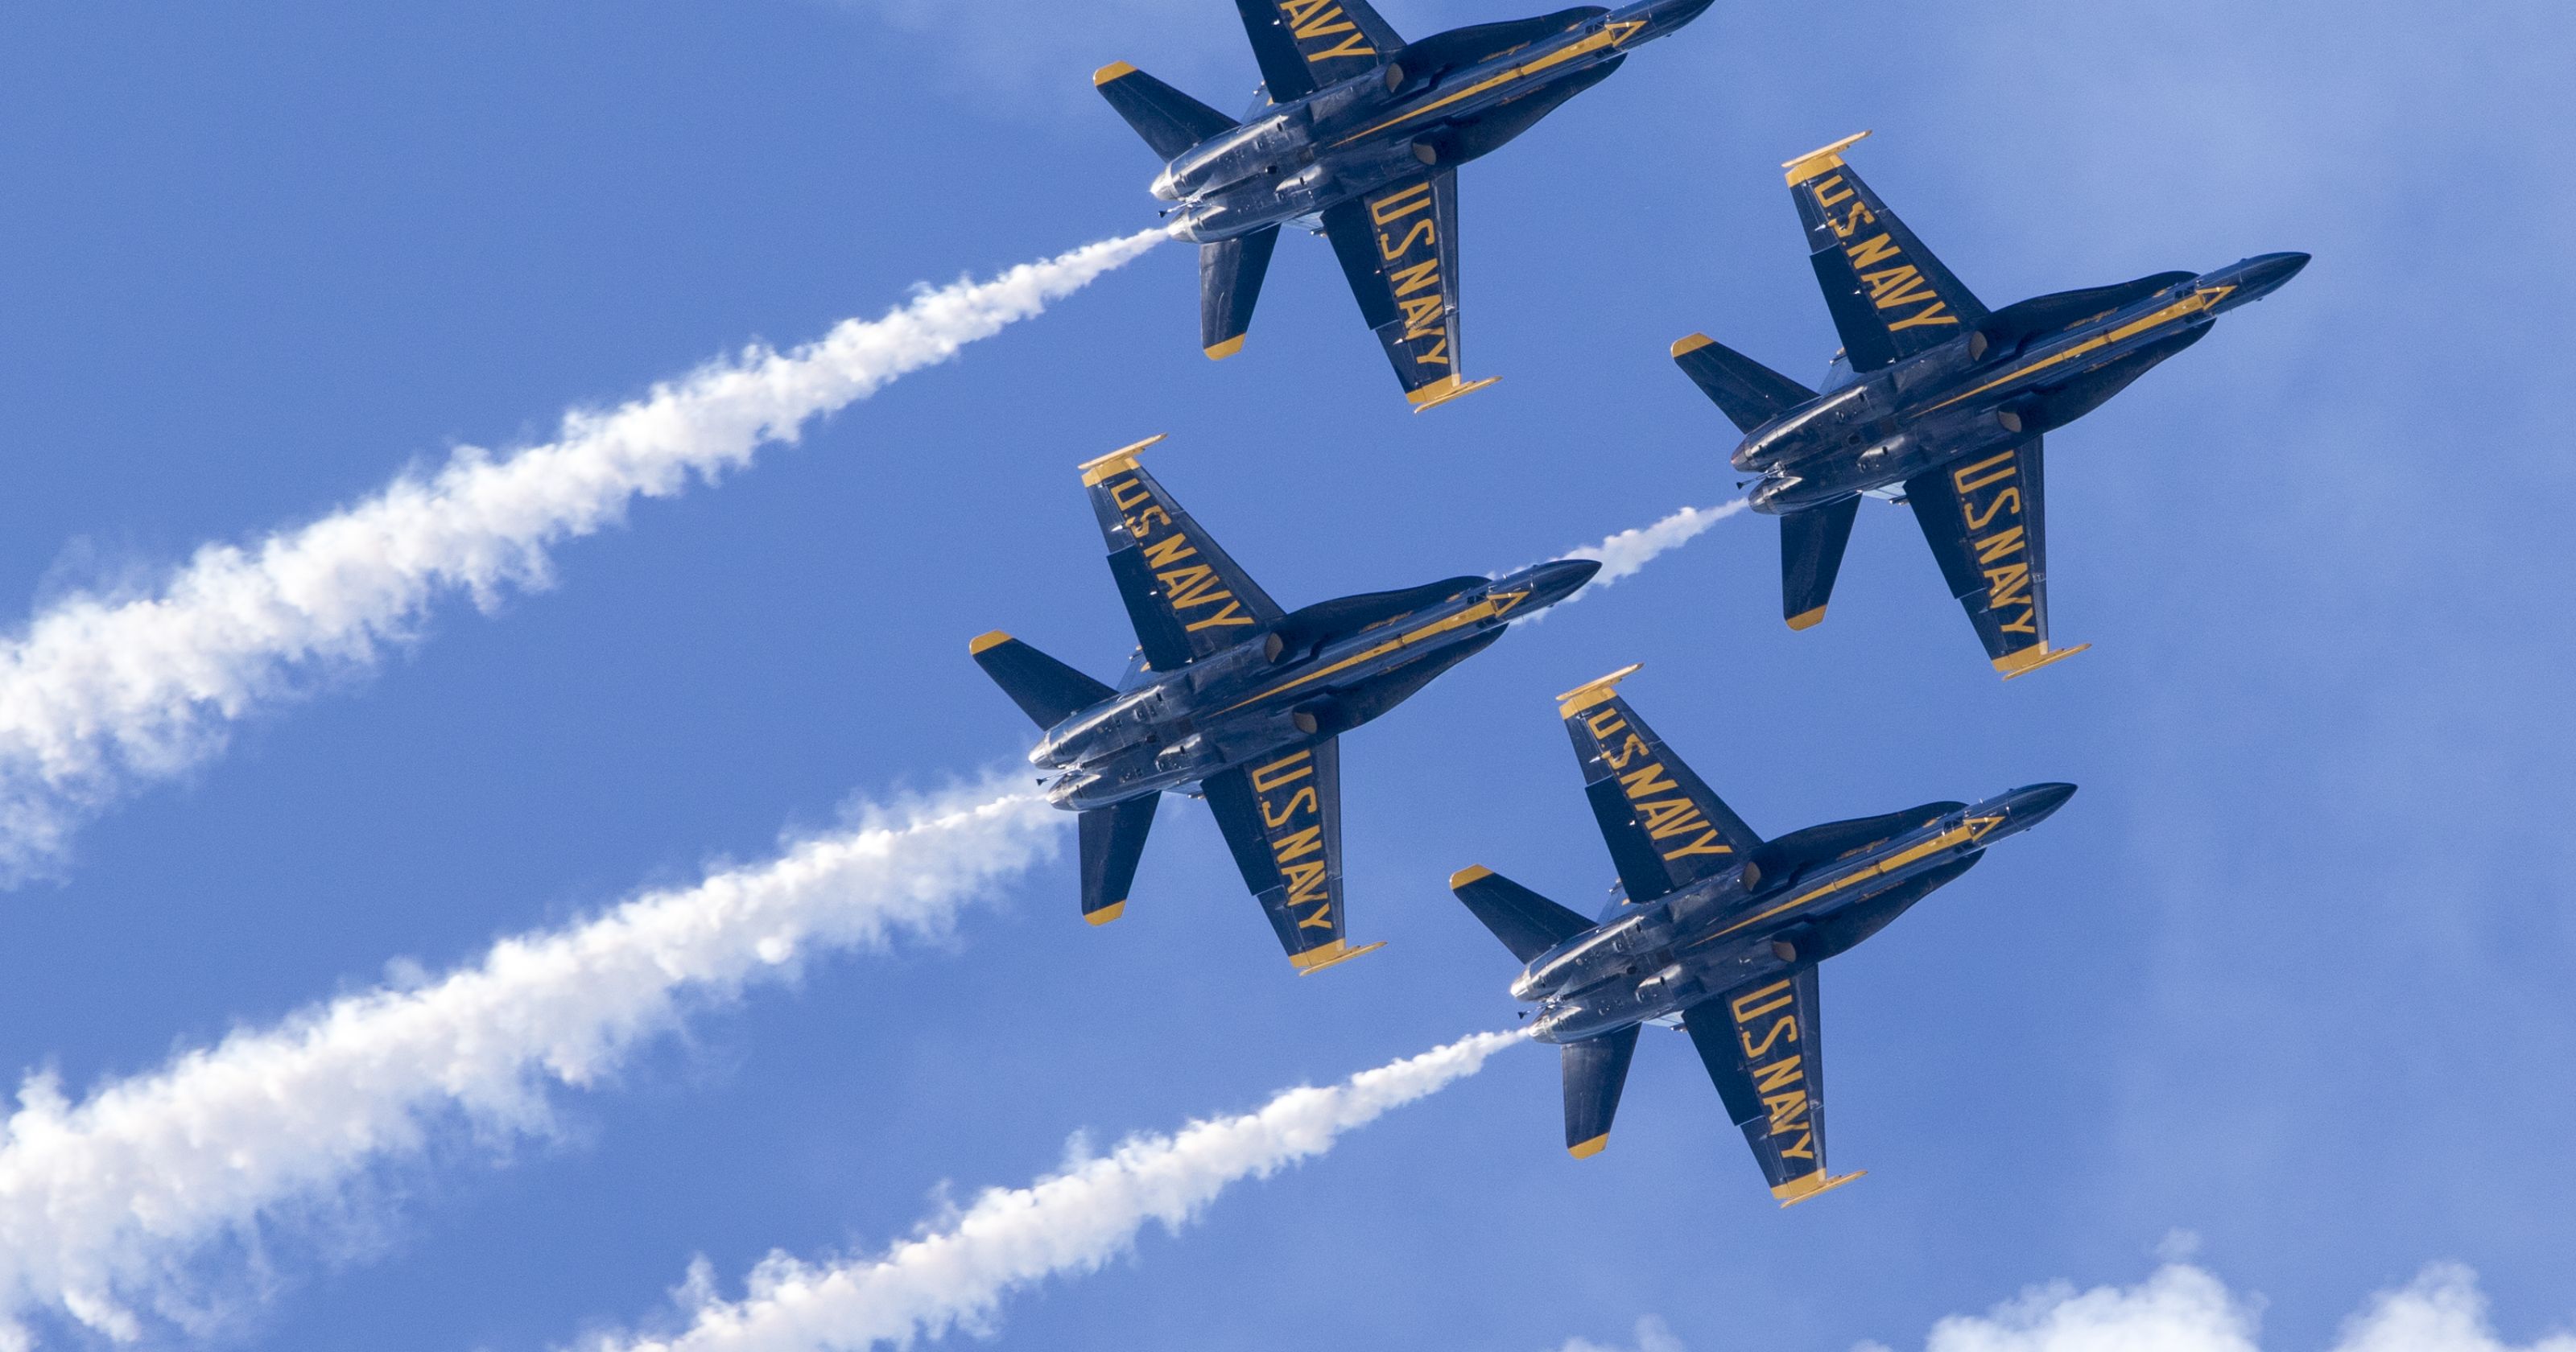 Blue Angels Homecoming Air Show: Thousands to attend last day of show